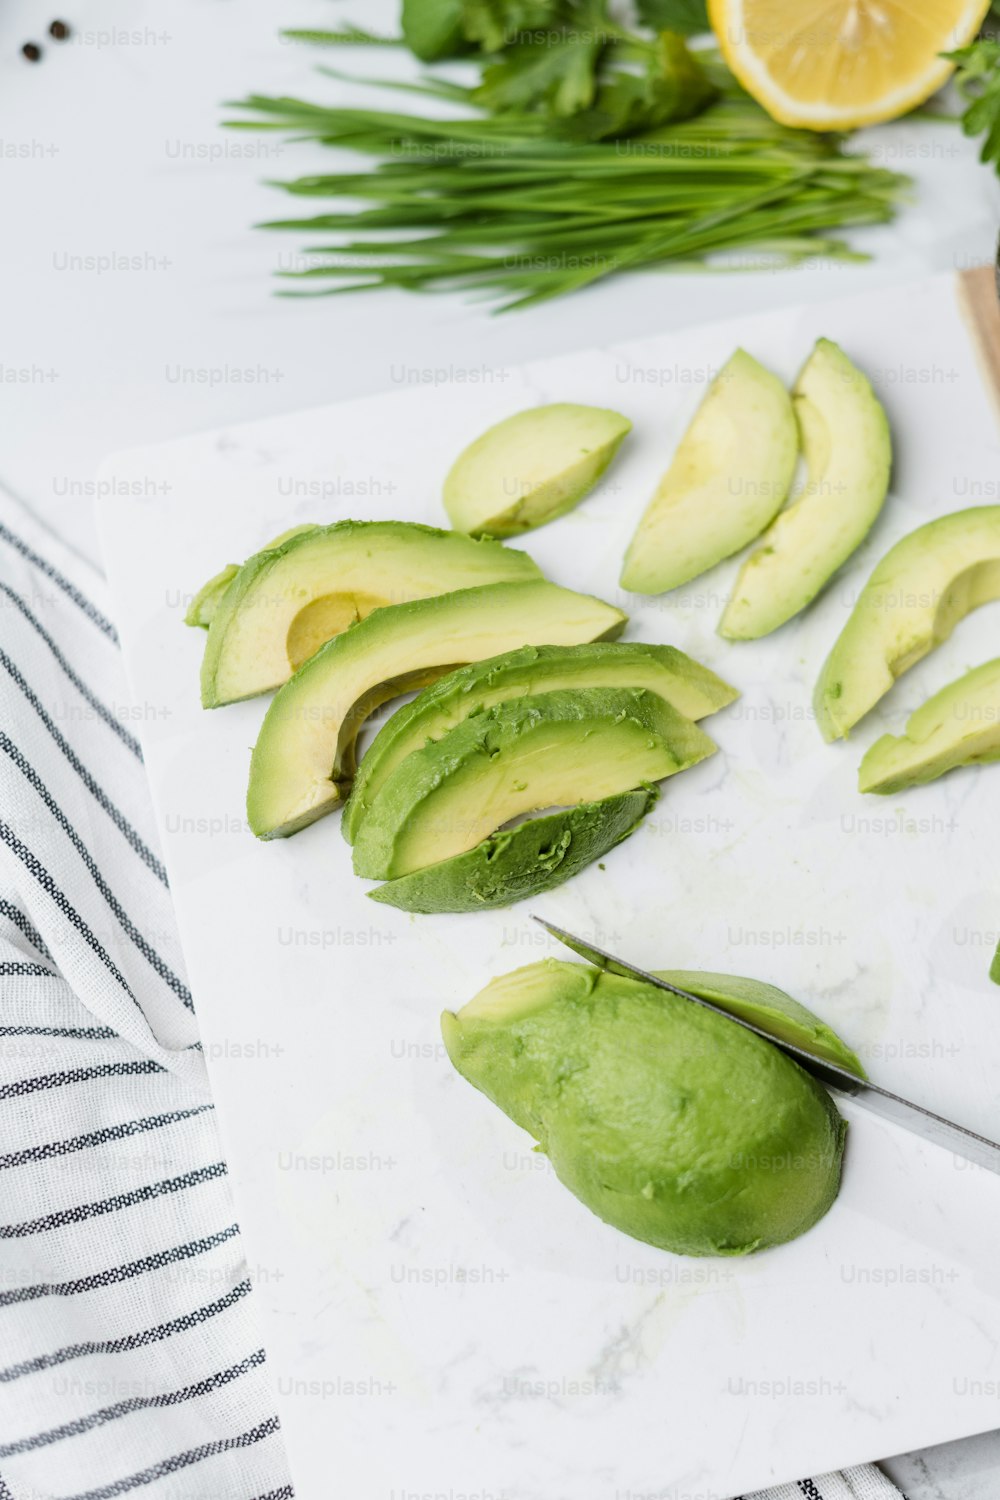 avocados cut up on a cutting board with a knife